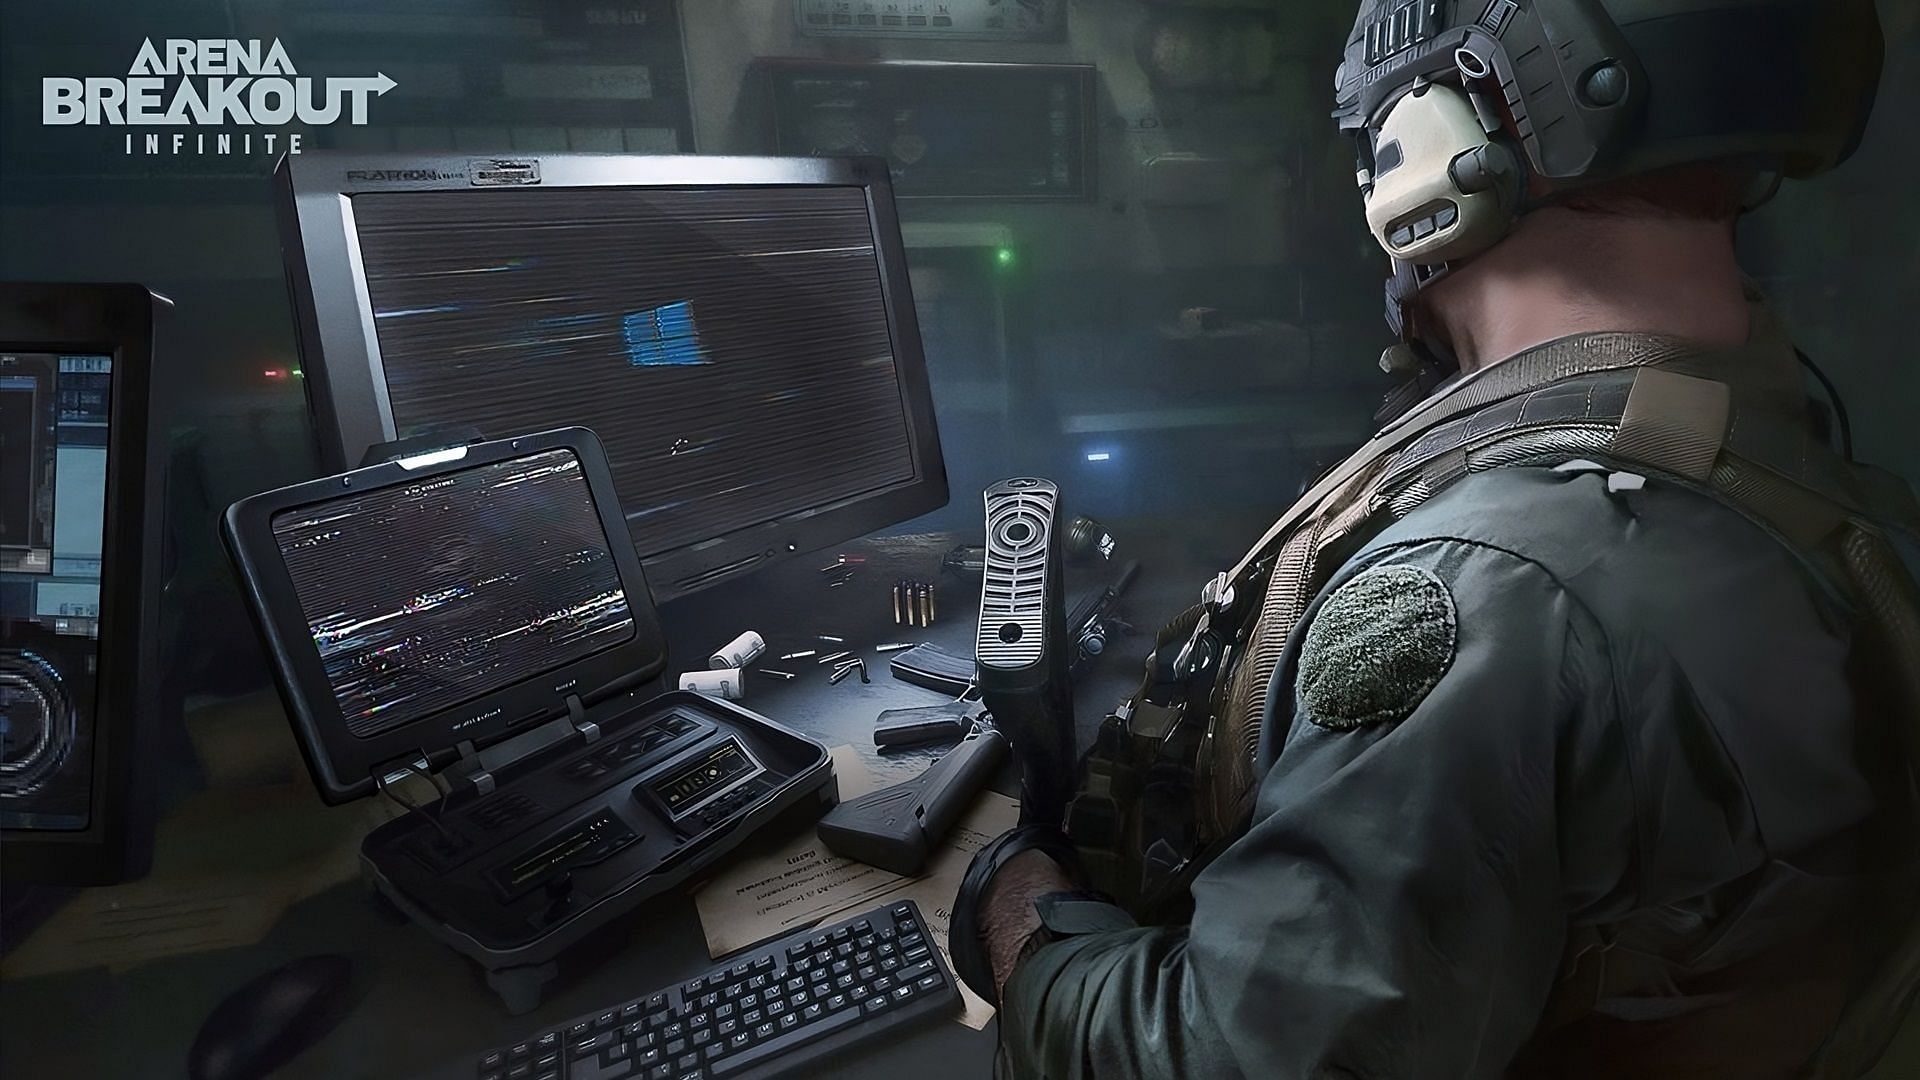 An Operator in Arena Breakout Infinite looking at the login issue in a Windows computer